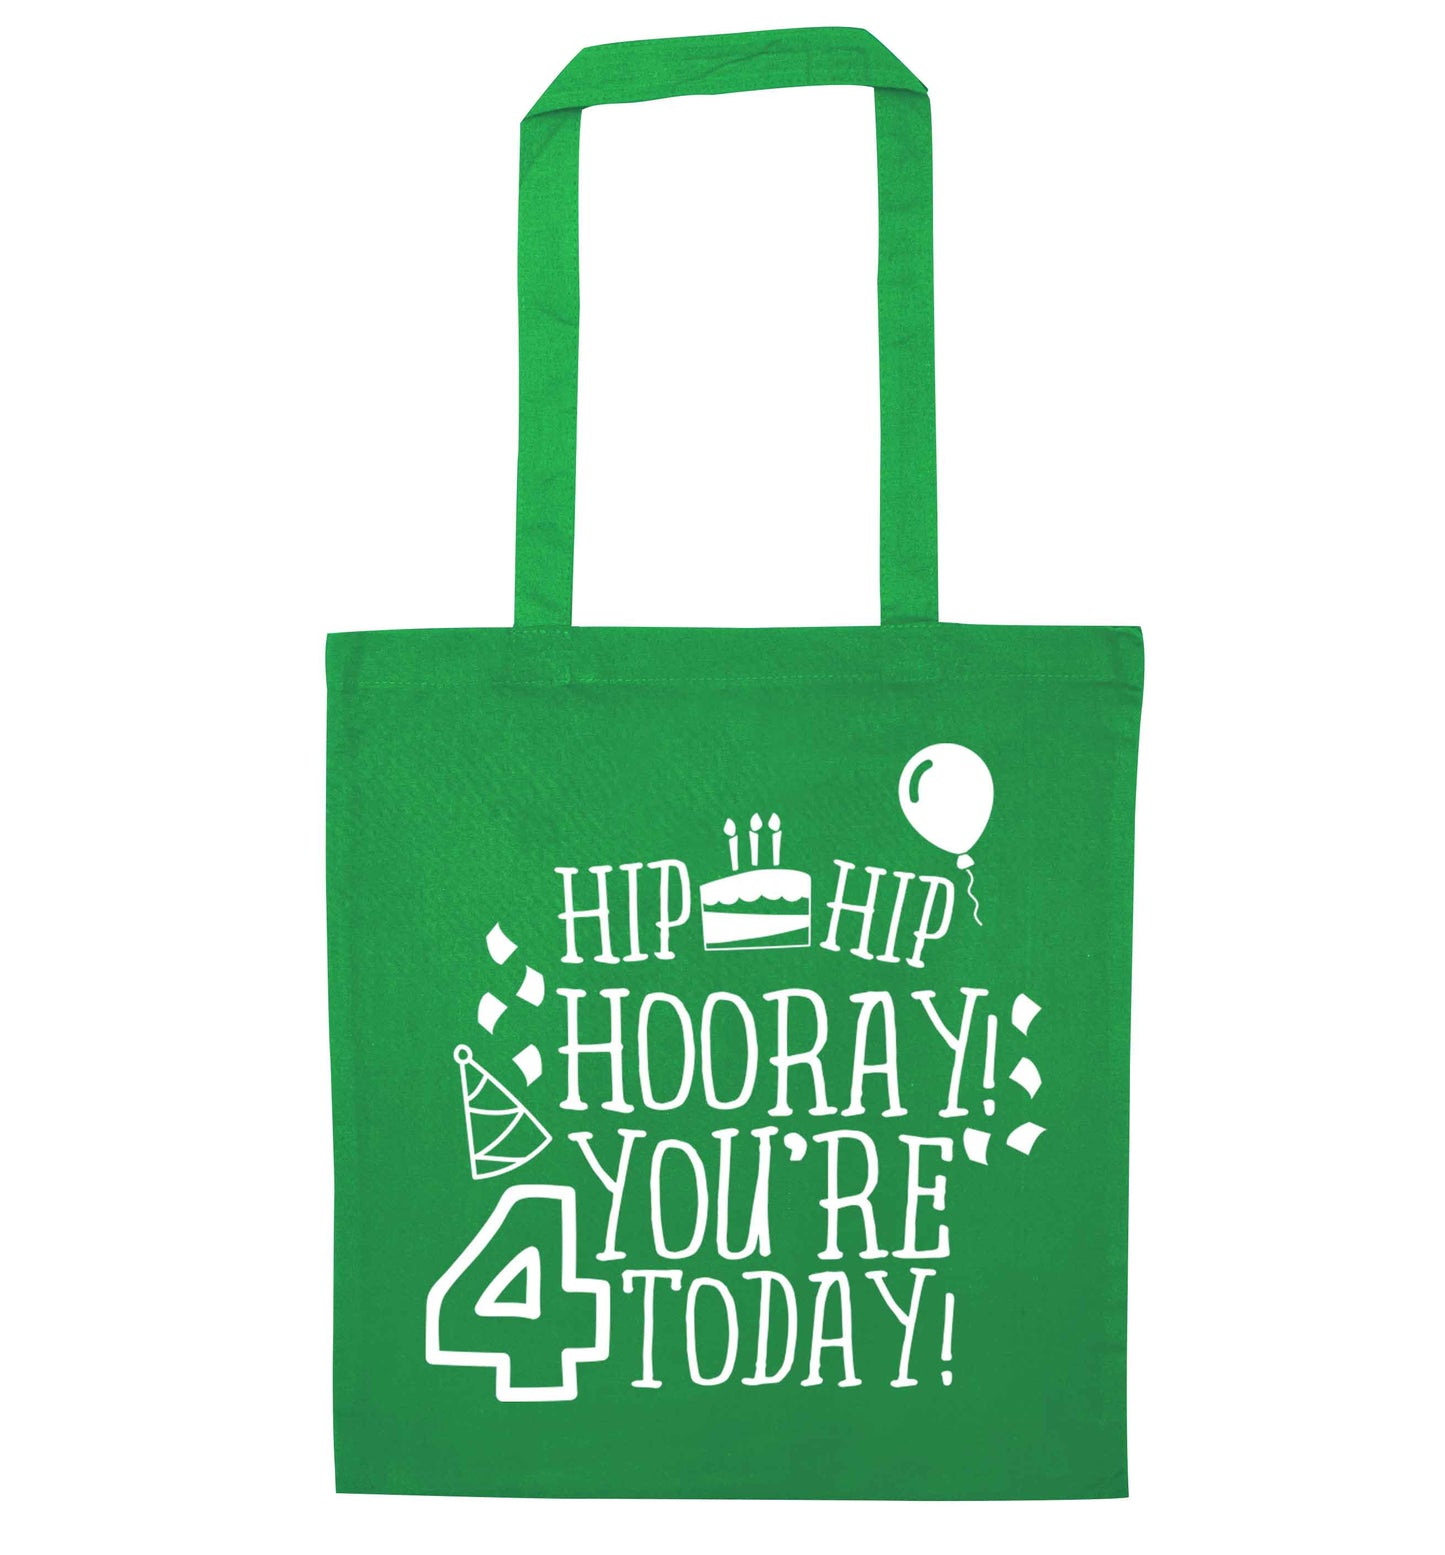 Hip hip hooray you're four today!green tote bag